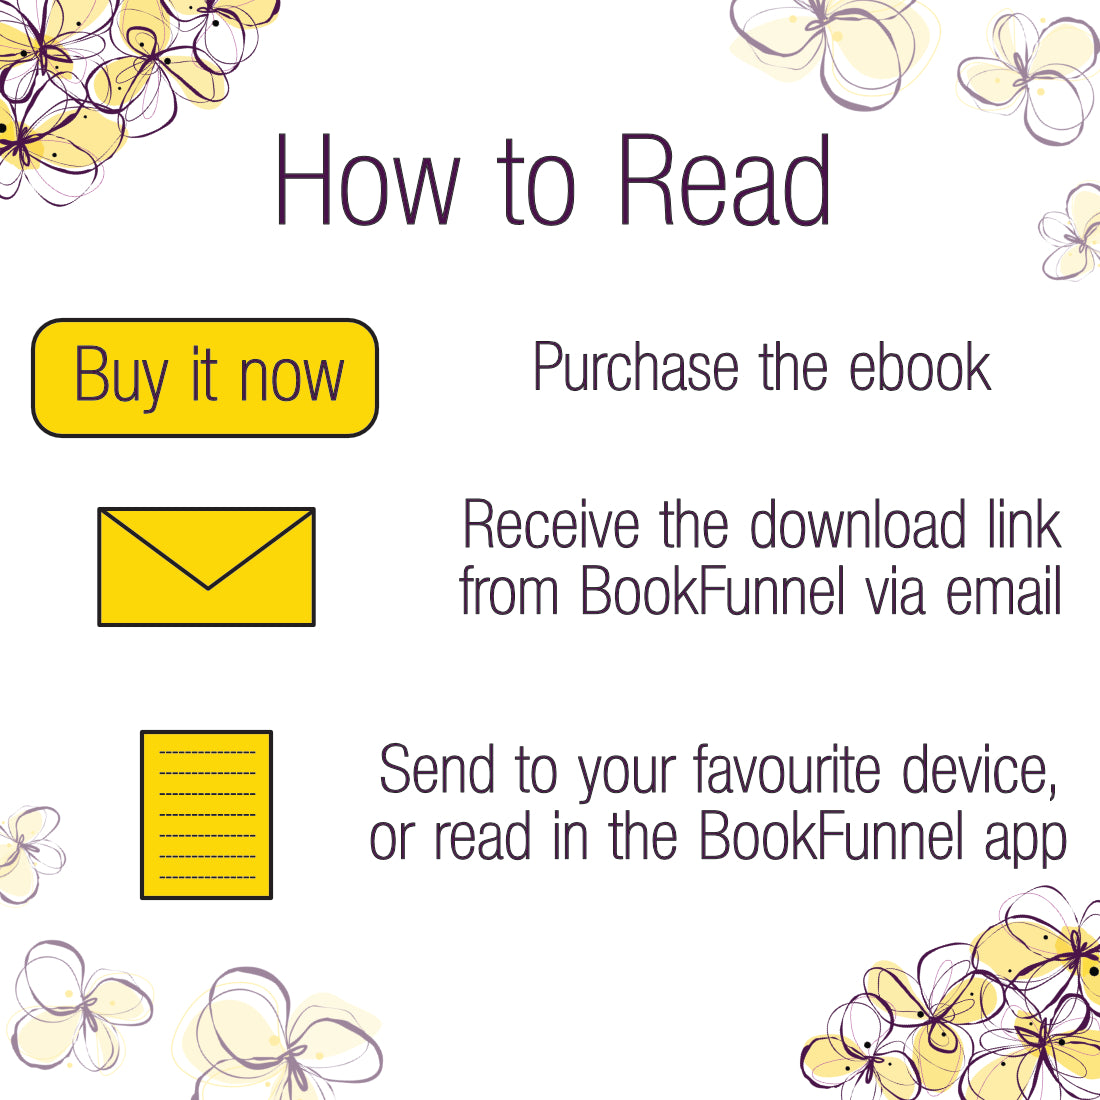 How To Read: Purchase the ebook, get the download link from Bookfunnel, send to your device.